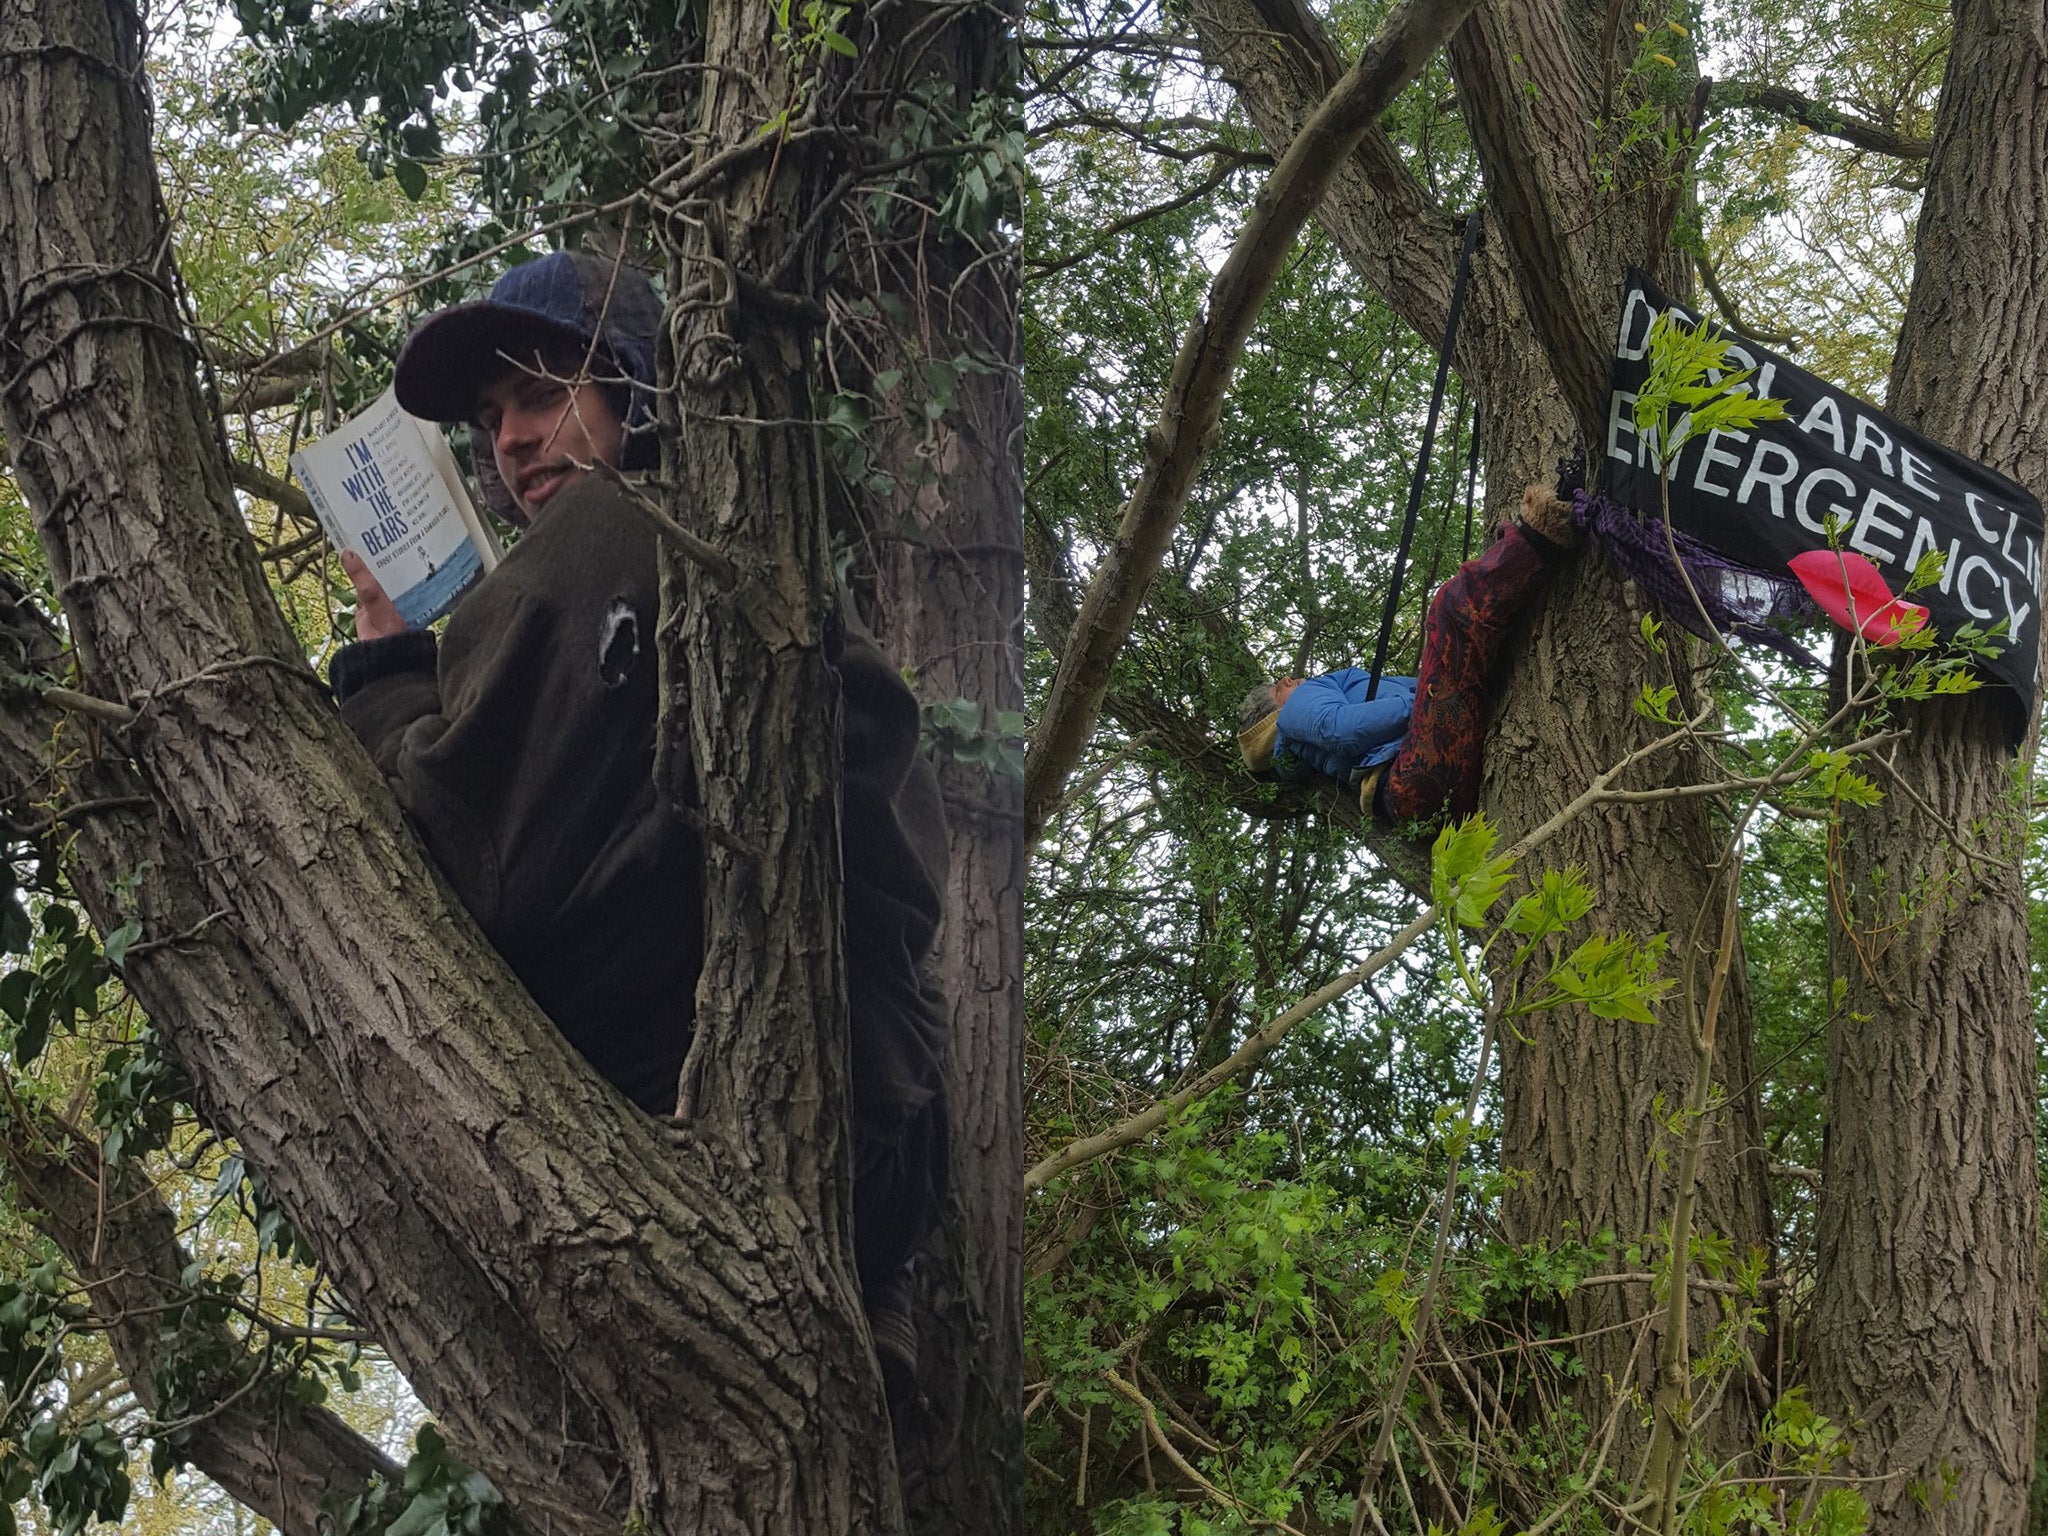 Twelve Extinction Rebellion activists scaled trees in Colne Valley nature reserve to stop them being chopped down